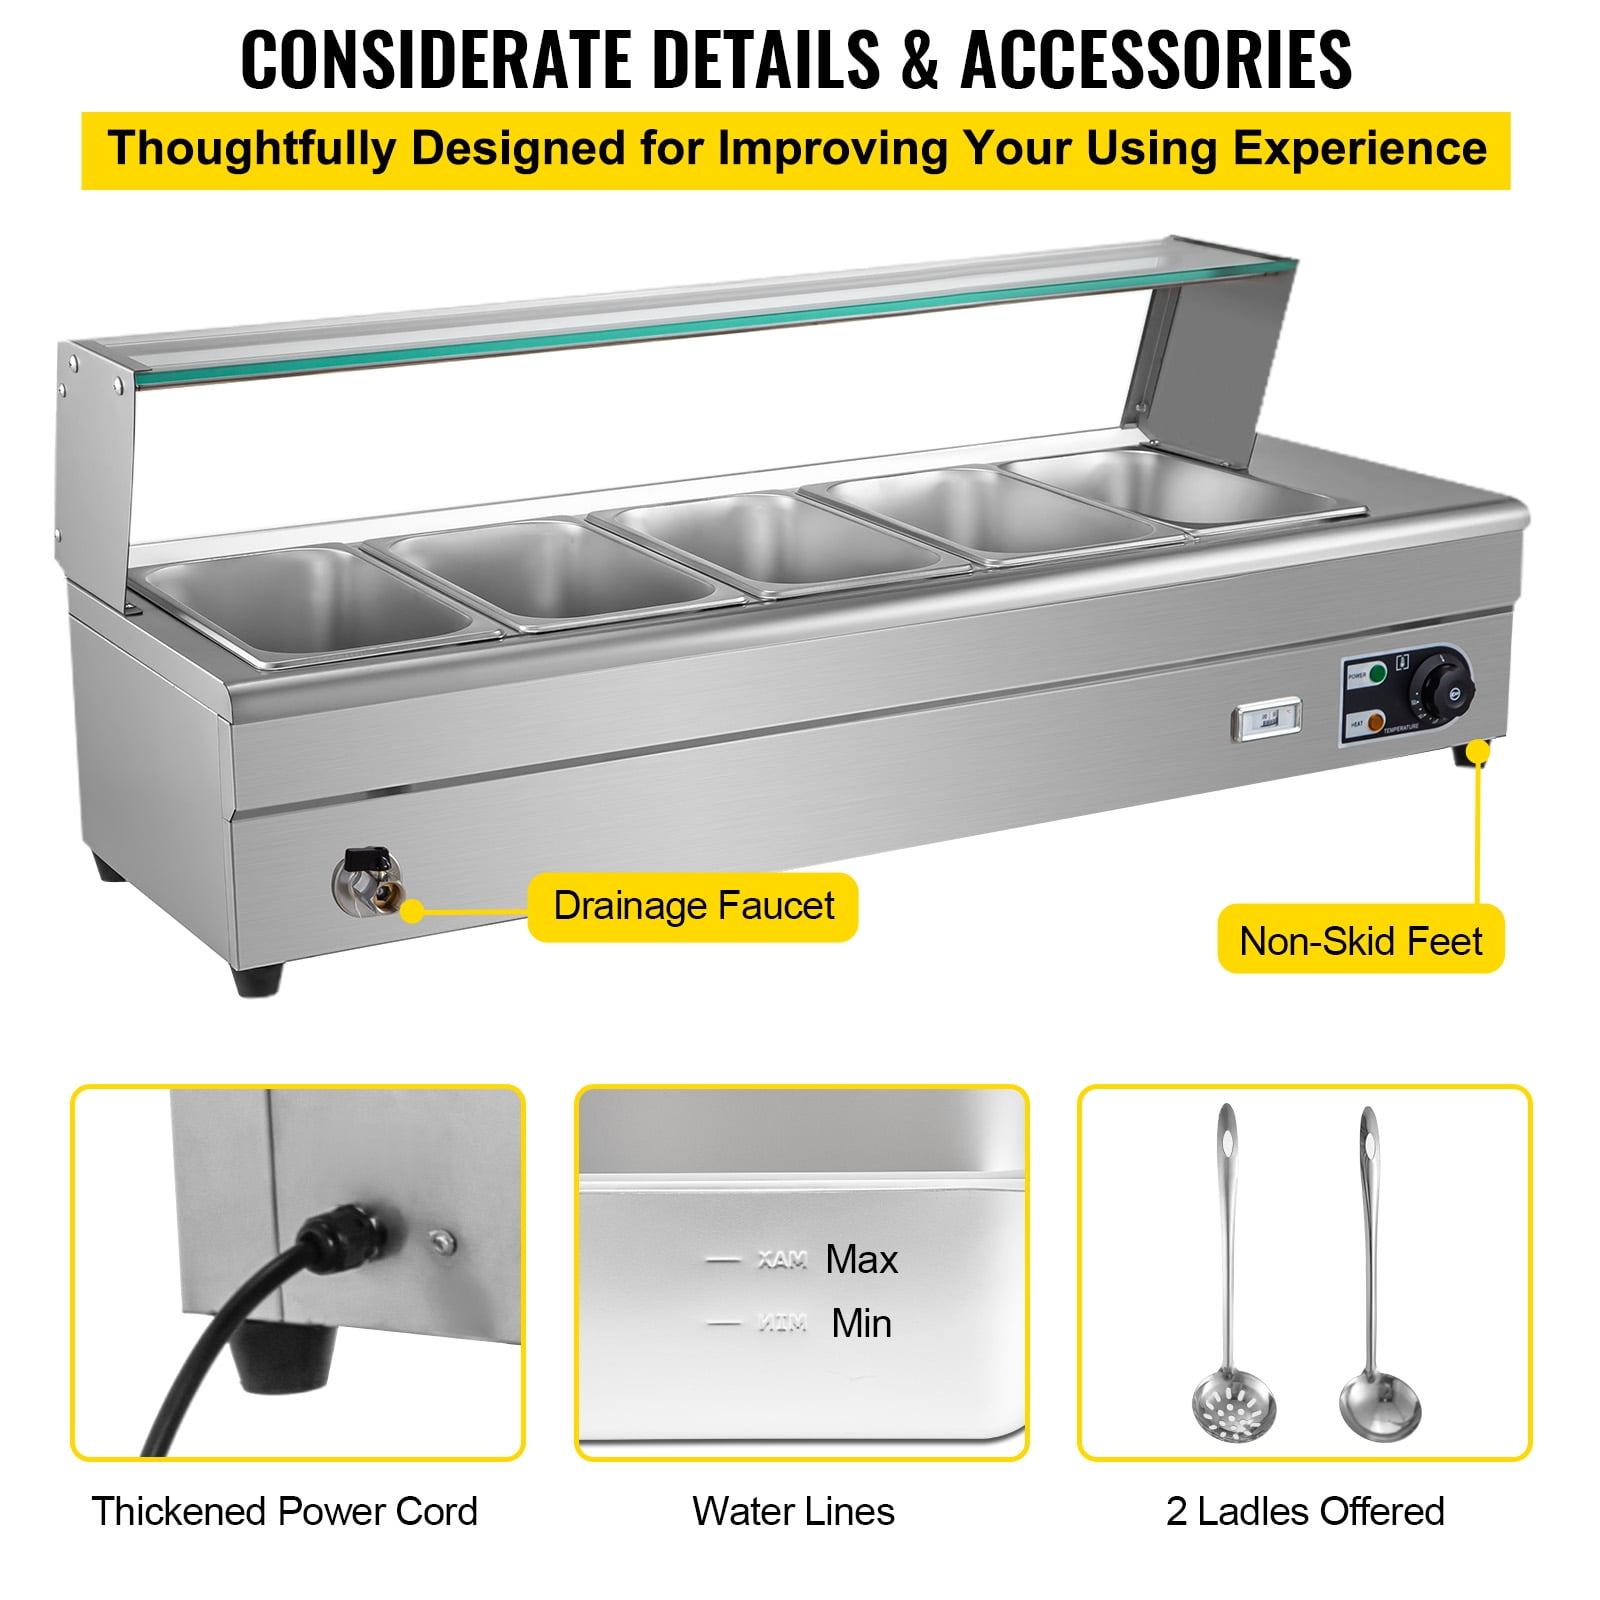 VEVORbrand 110V Bain Marie Food Warmer 5 Pan x 1/2 GN, Food Grade Stainelss  Steel Commercial Food Steam Table 6-Inch Deep, 1500W Electric Countertop Food  Warmer 55 Quart with Tempered Glass Shield - Walmart.com